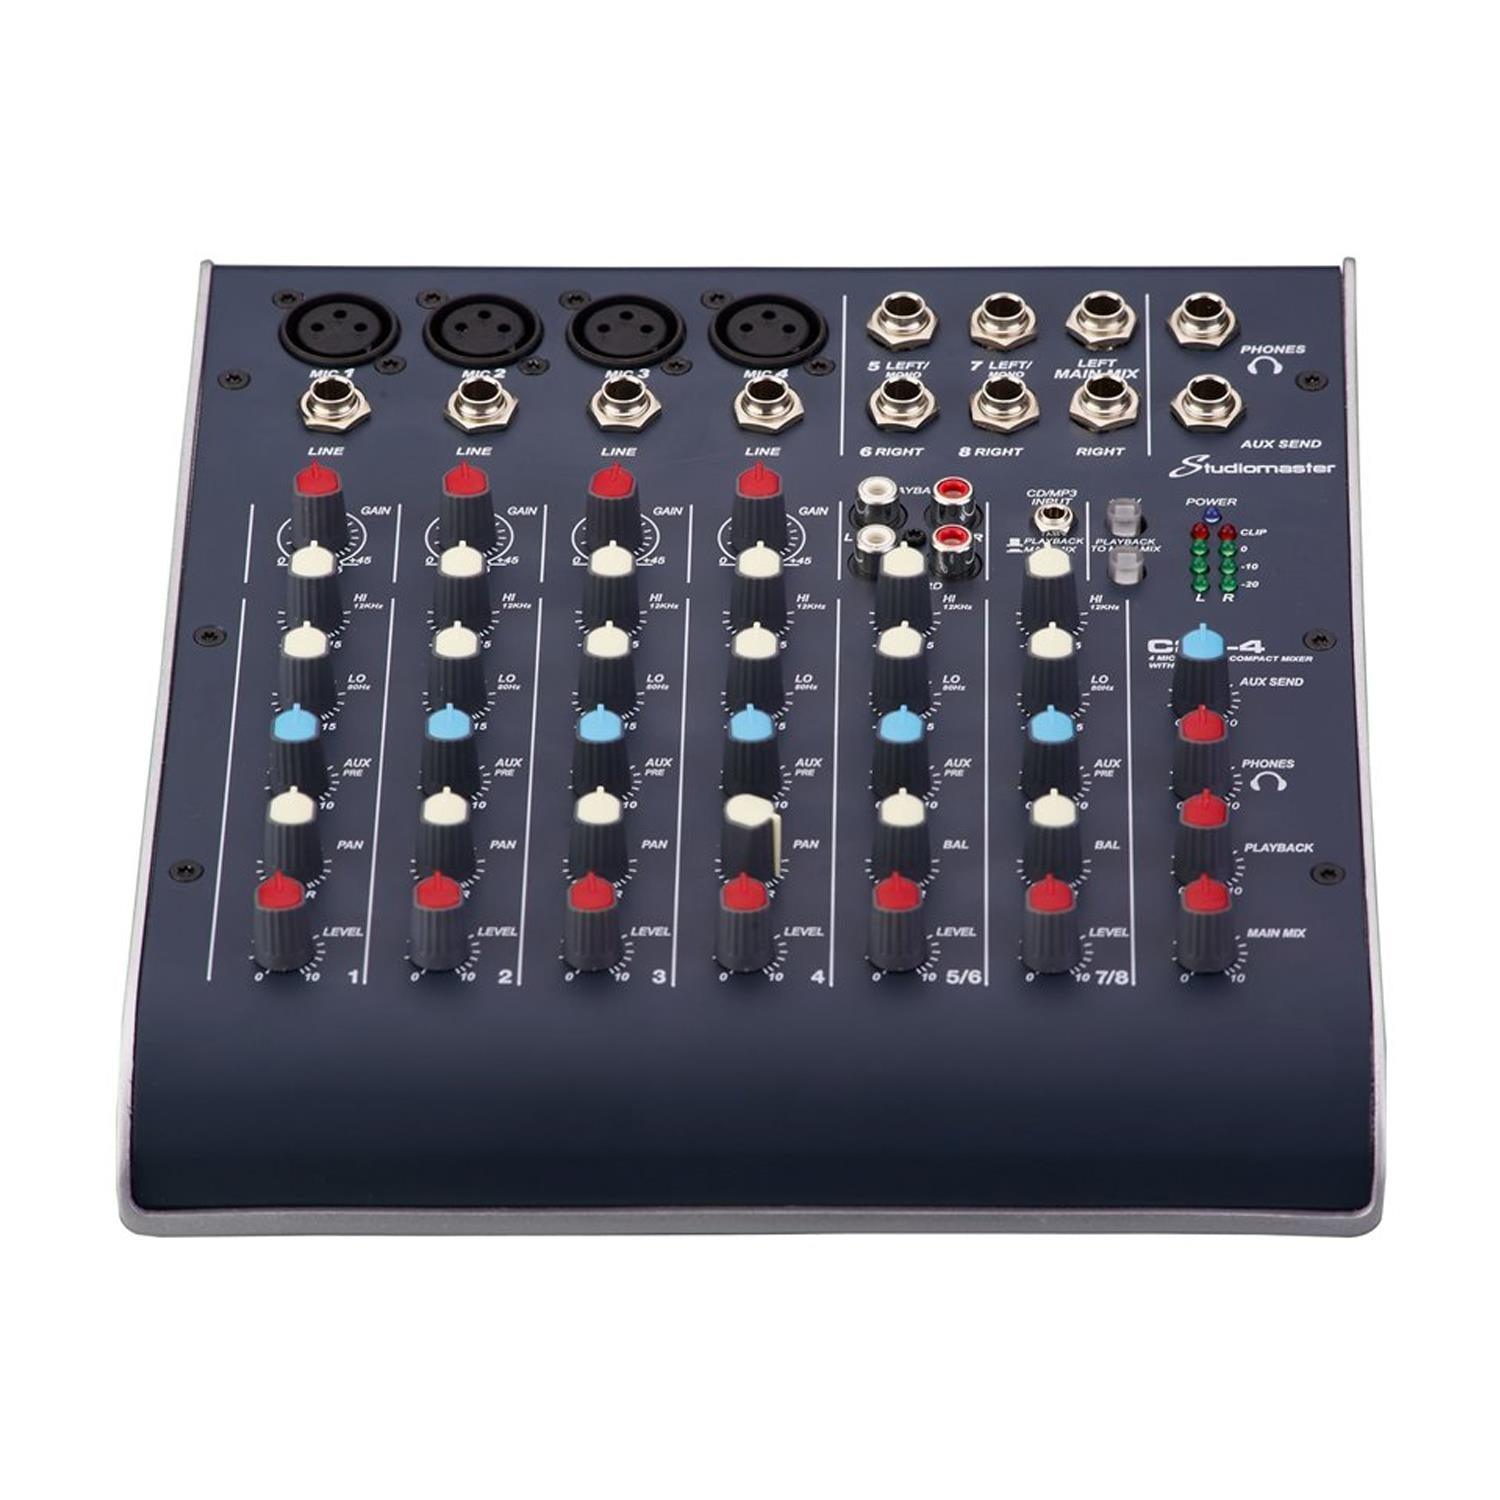 Studiomaster C2-4 4 Channel Compact USB Mixer - DY Pro Audio